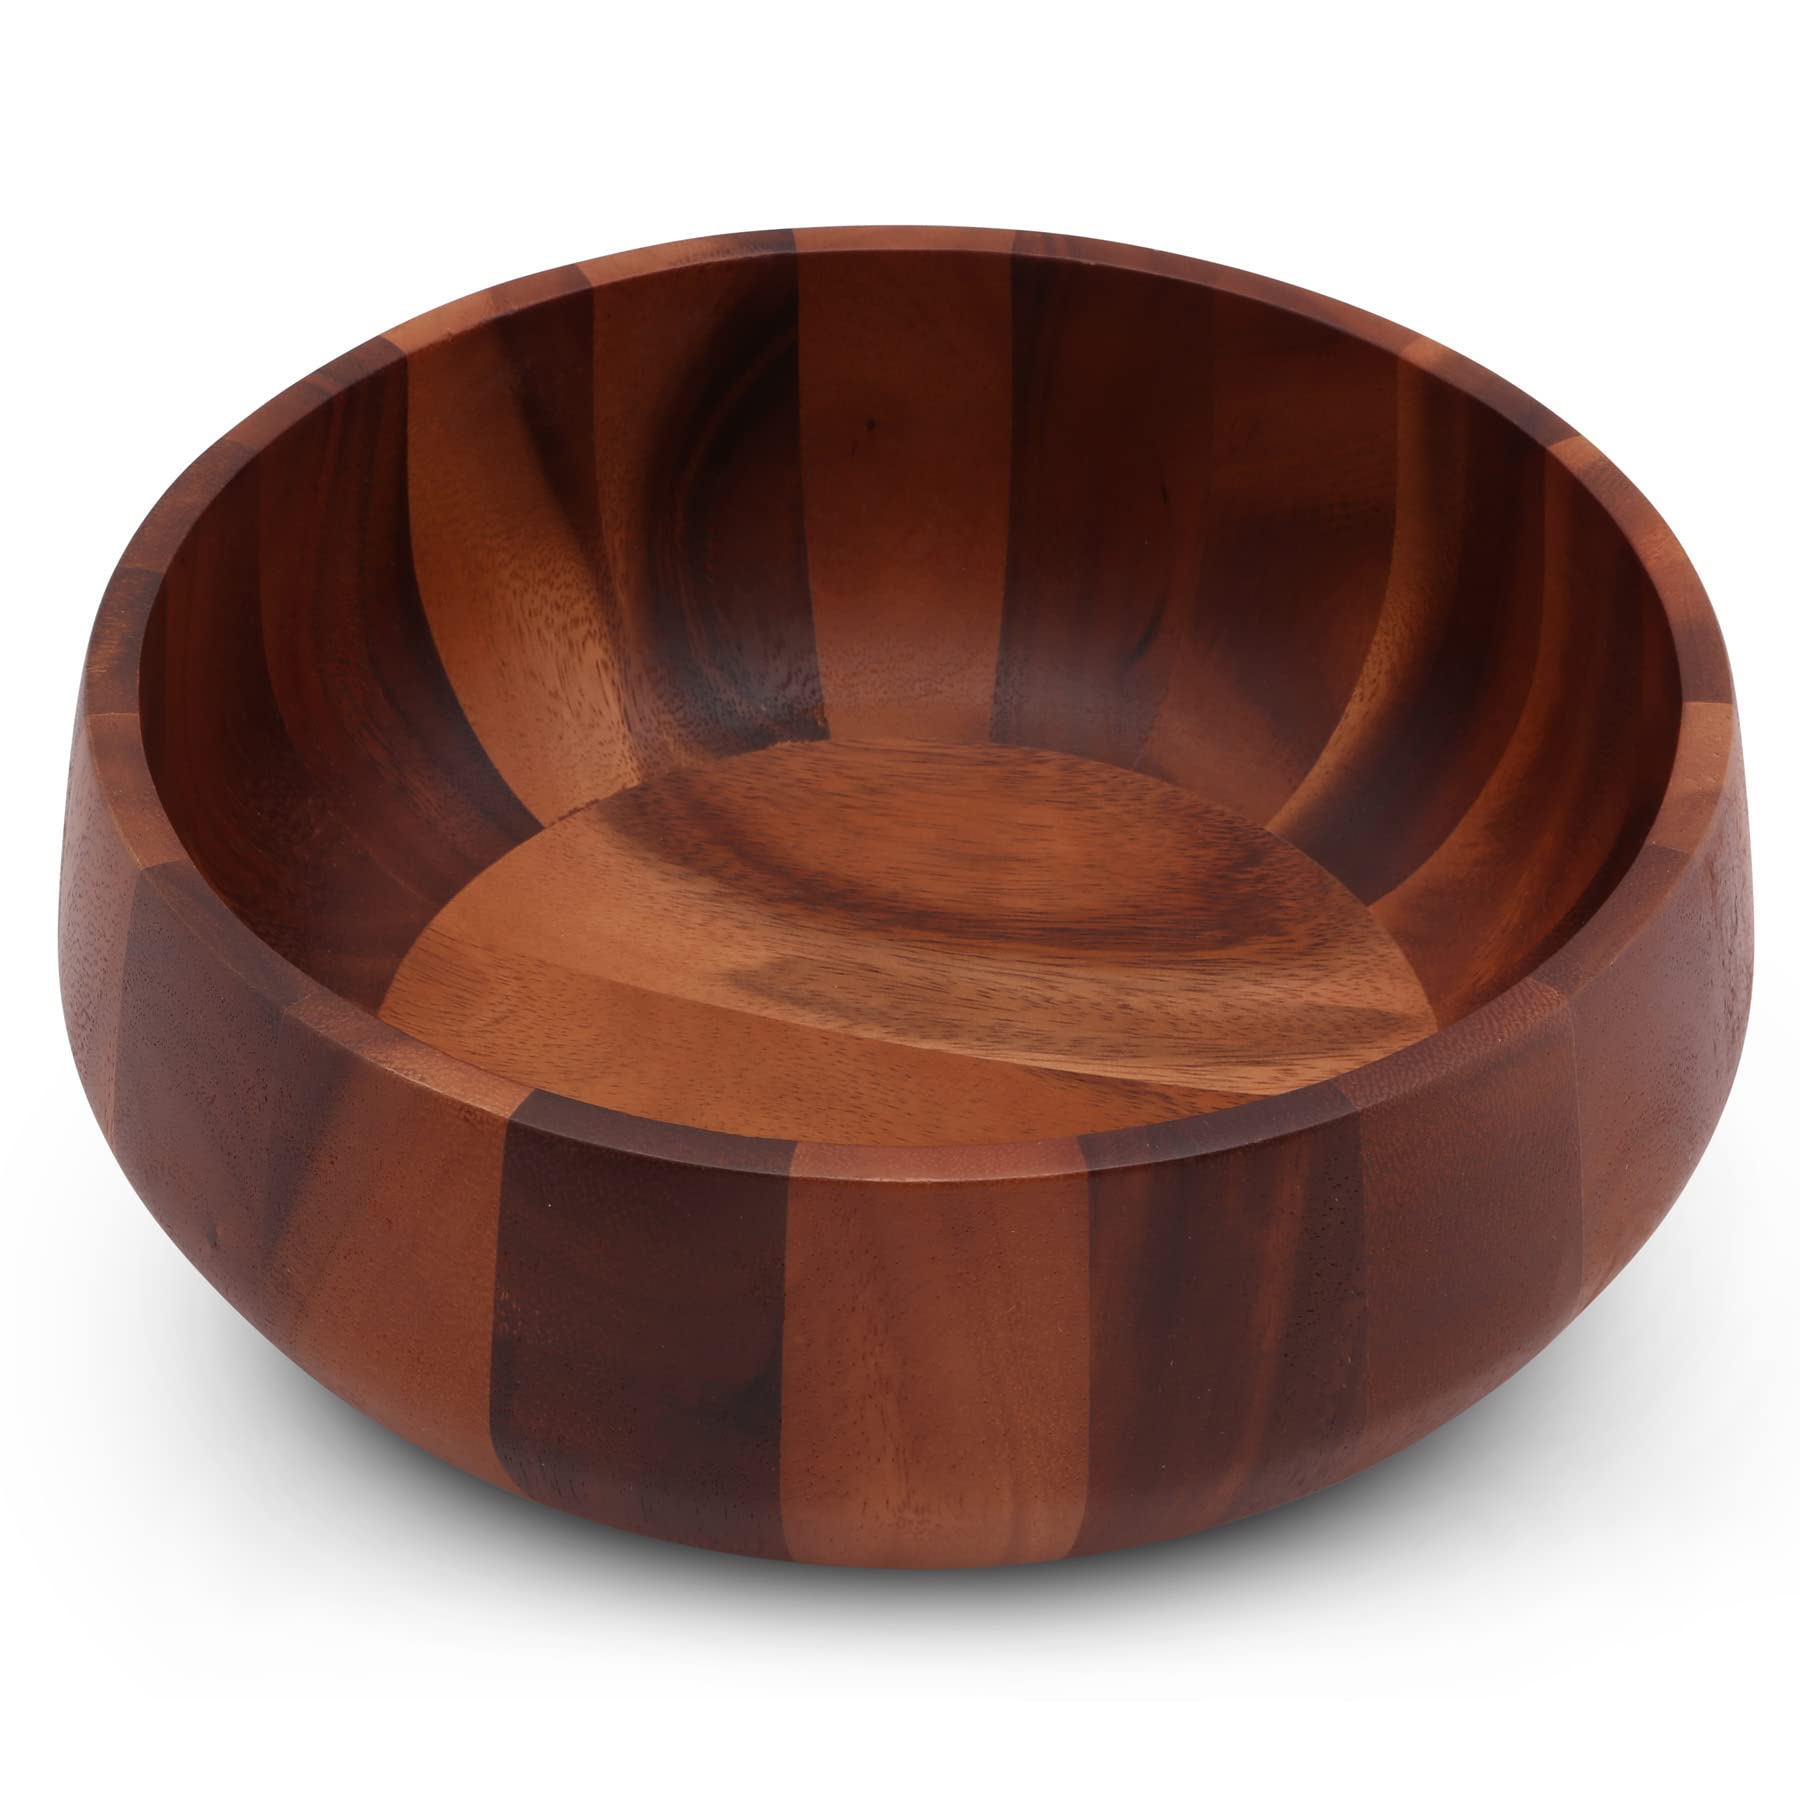 Arthur Court Acacia Wood Serving Bowl for Fruits or Salads Modern Round Shape Style 4.5 inch Tall x 11 inch Diameter Wooden Single Bowl